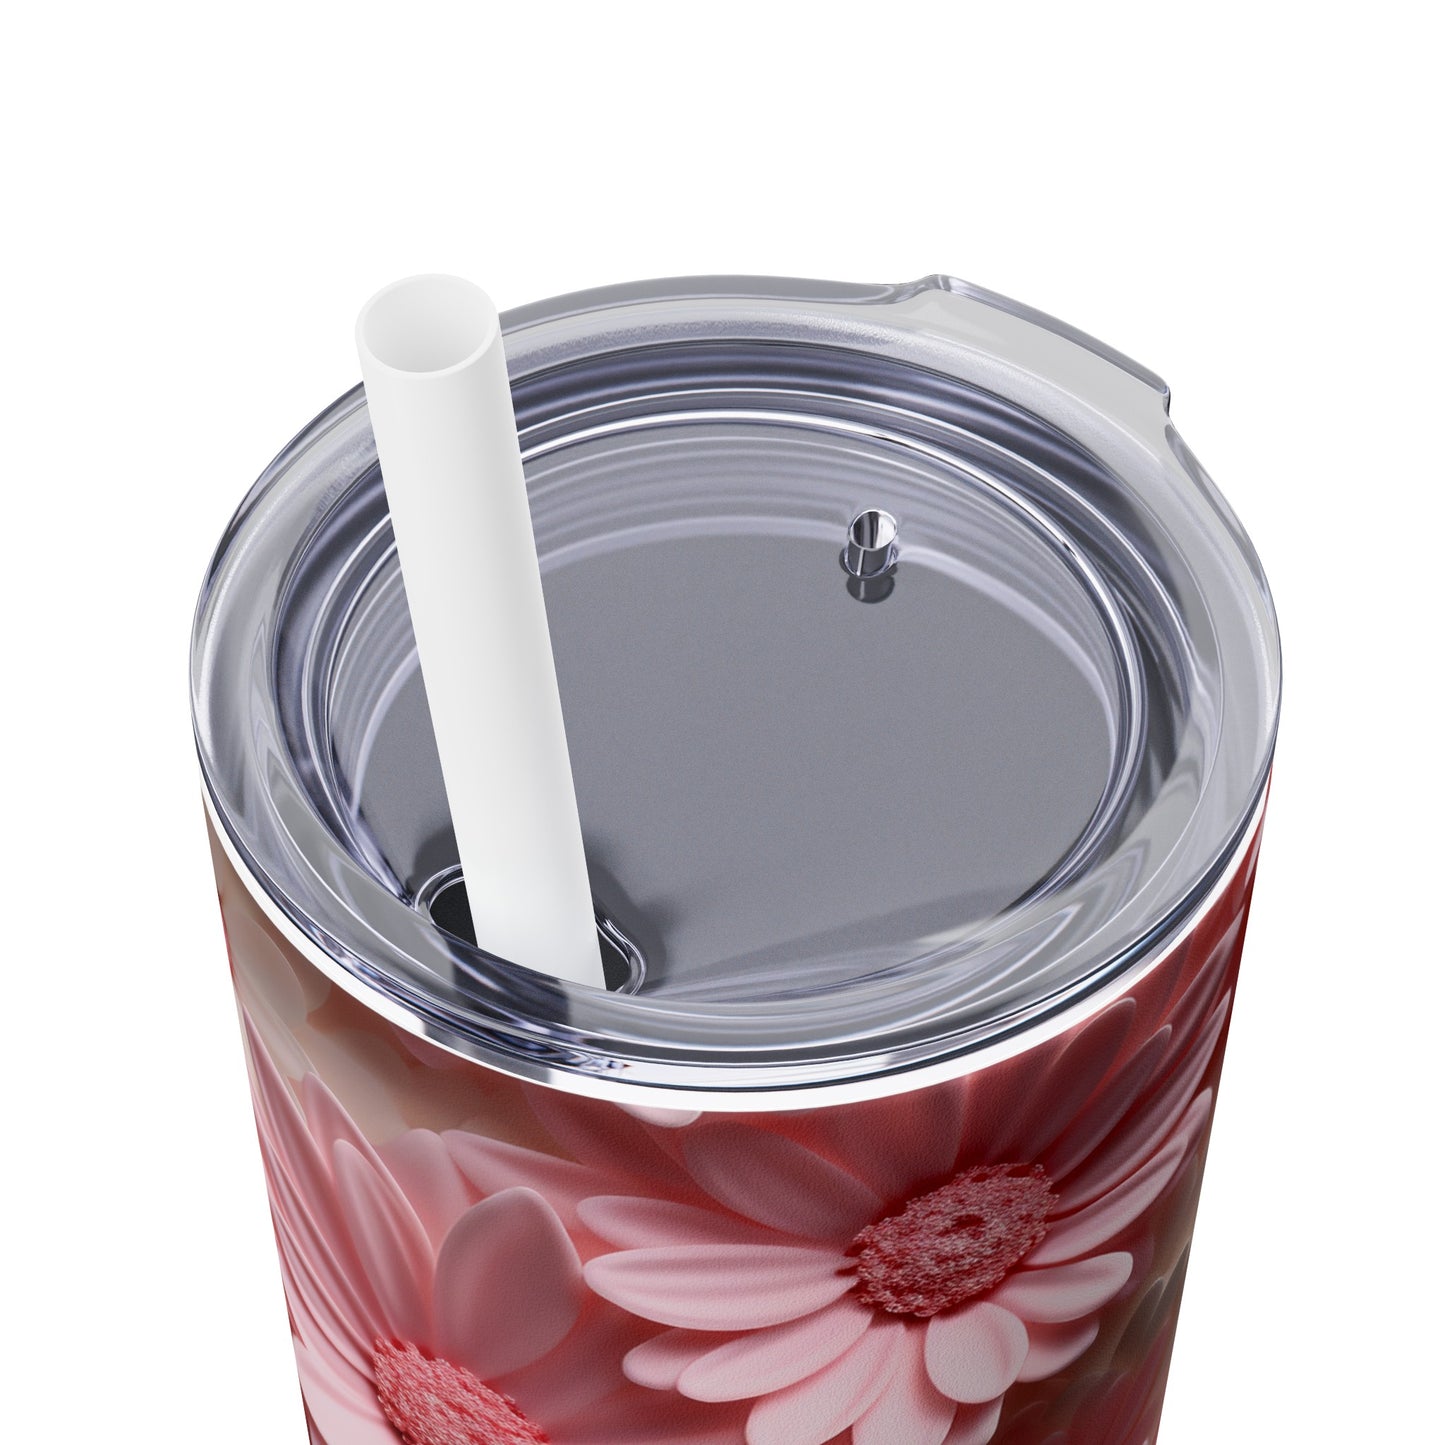 3D Pink and White Daisy Design Skinny Tumbler with Straw, 20oz